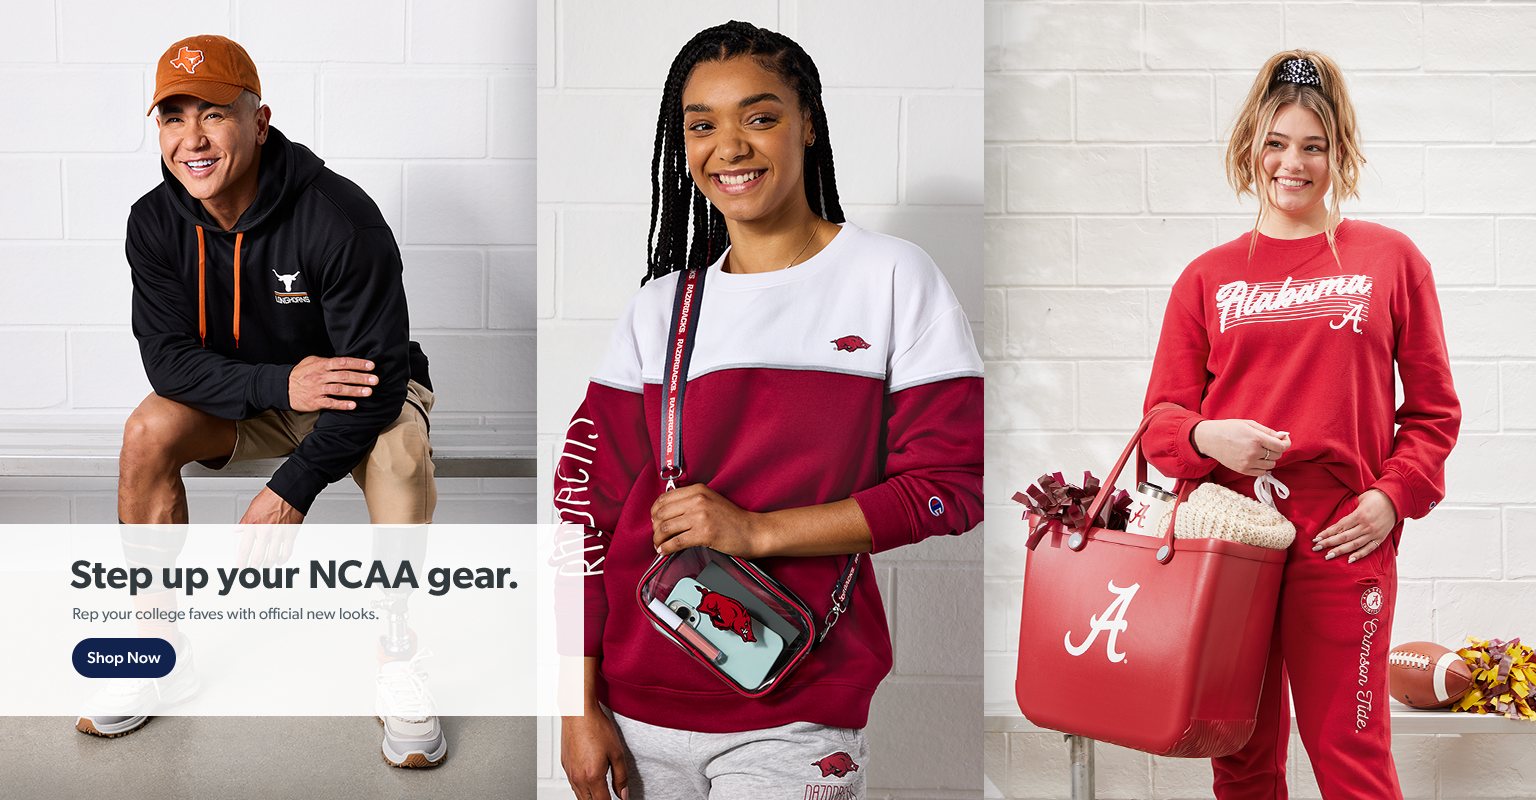 Step up your NCAA gear with official team apparel from your favorite colleges. Shop now.